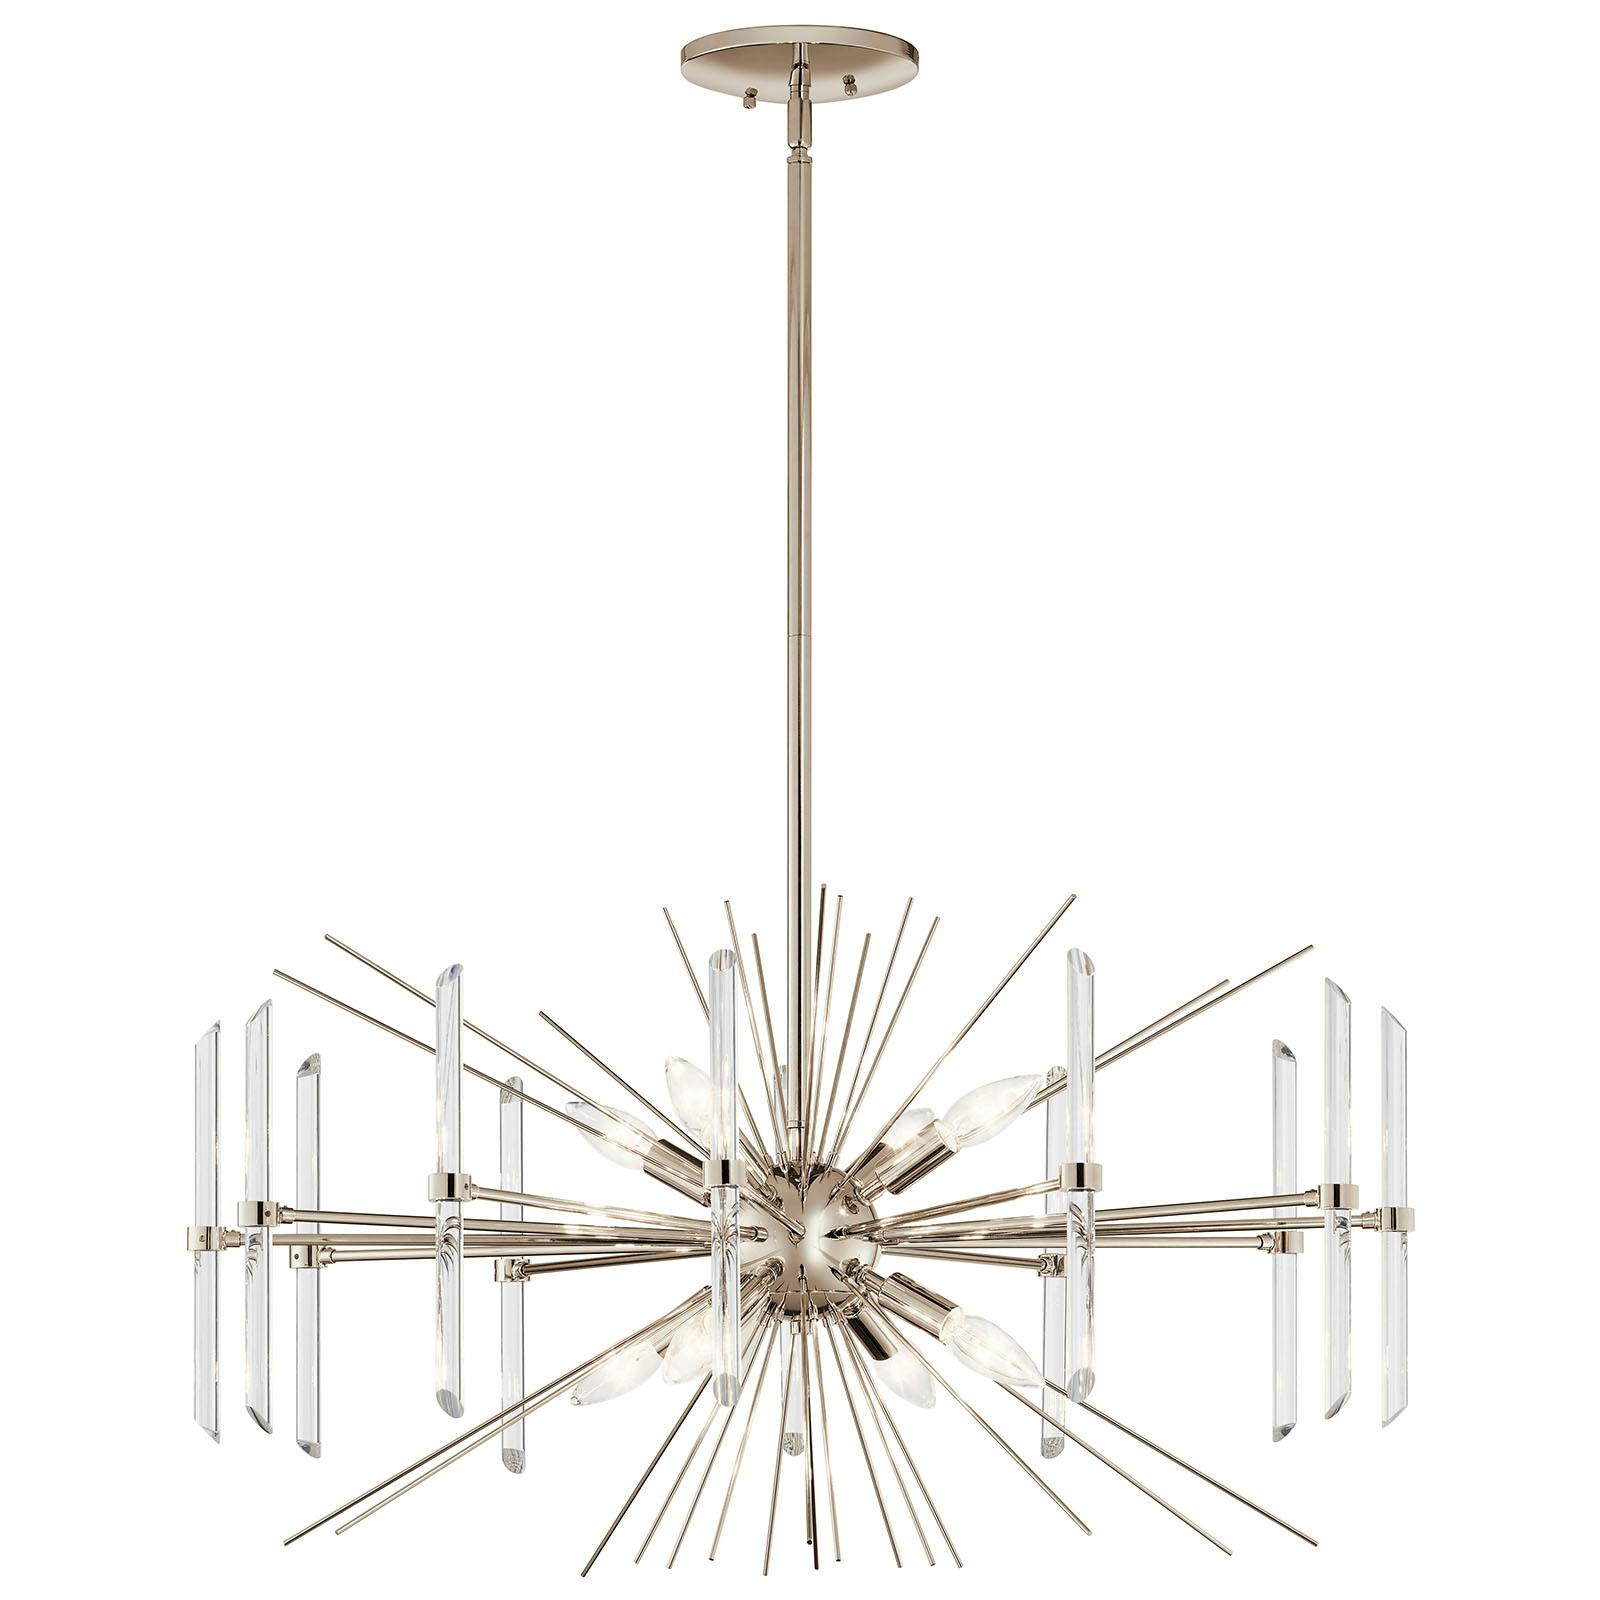 Eris Chandelier in Polished Nickel on a white background